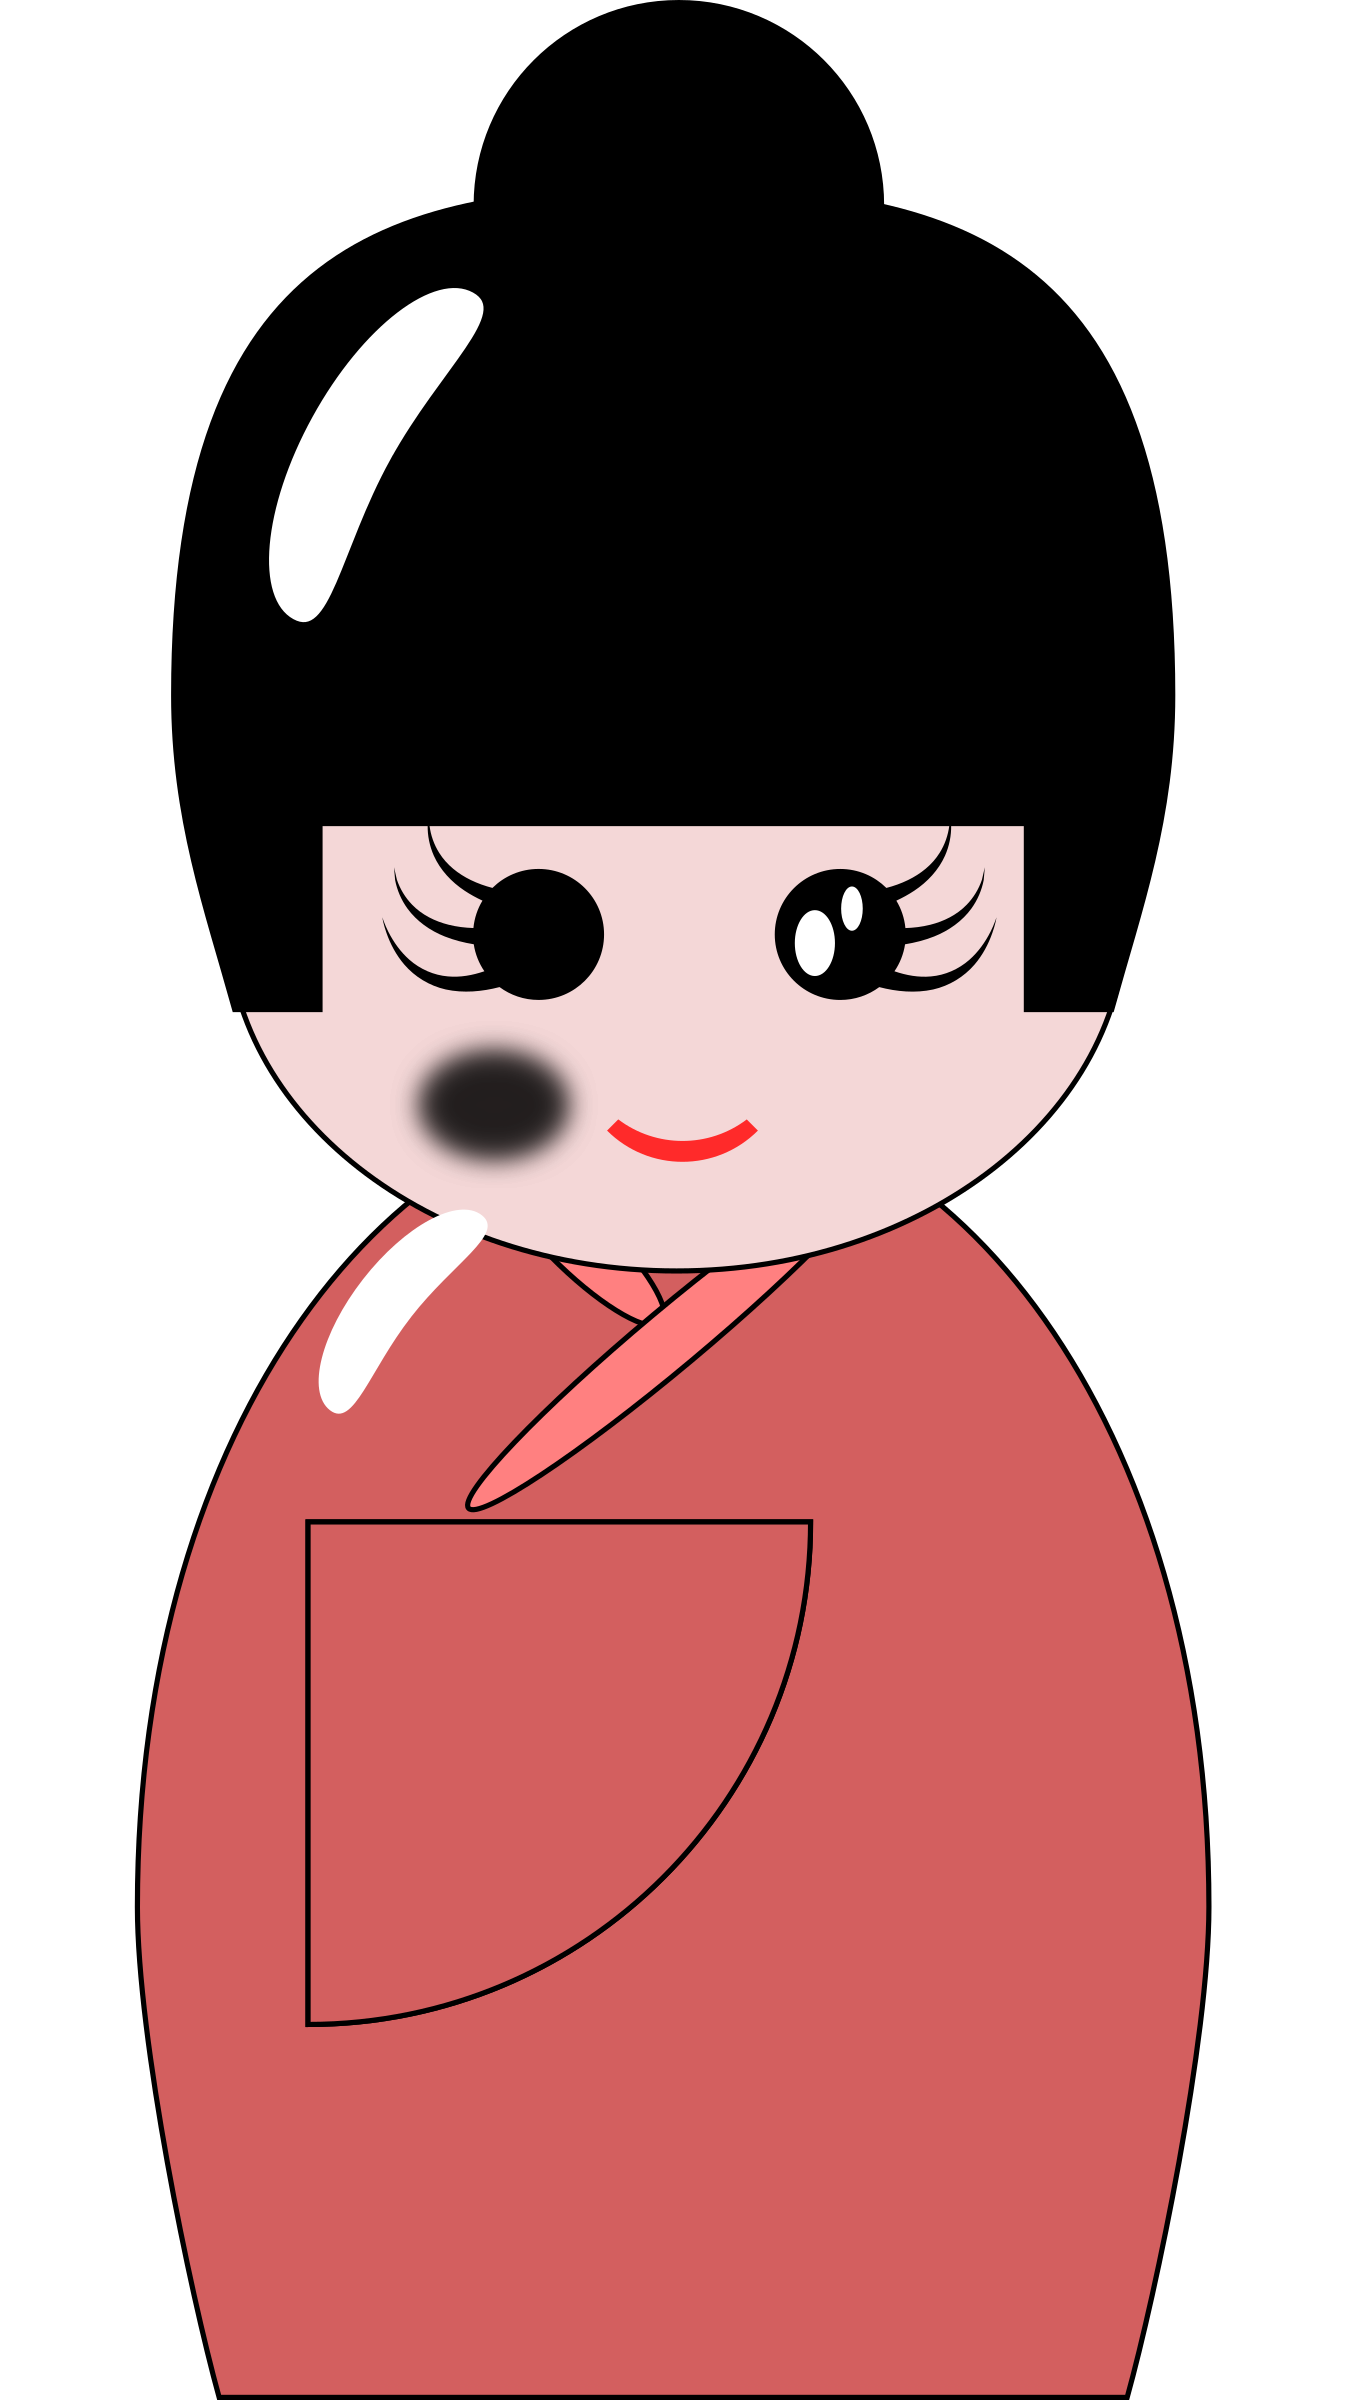 Japanese Doll Image Free Photo PNG PNG Image